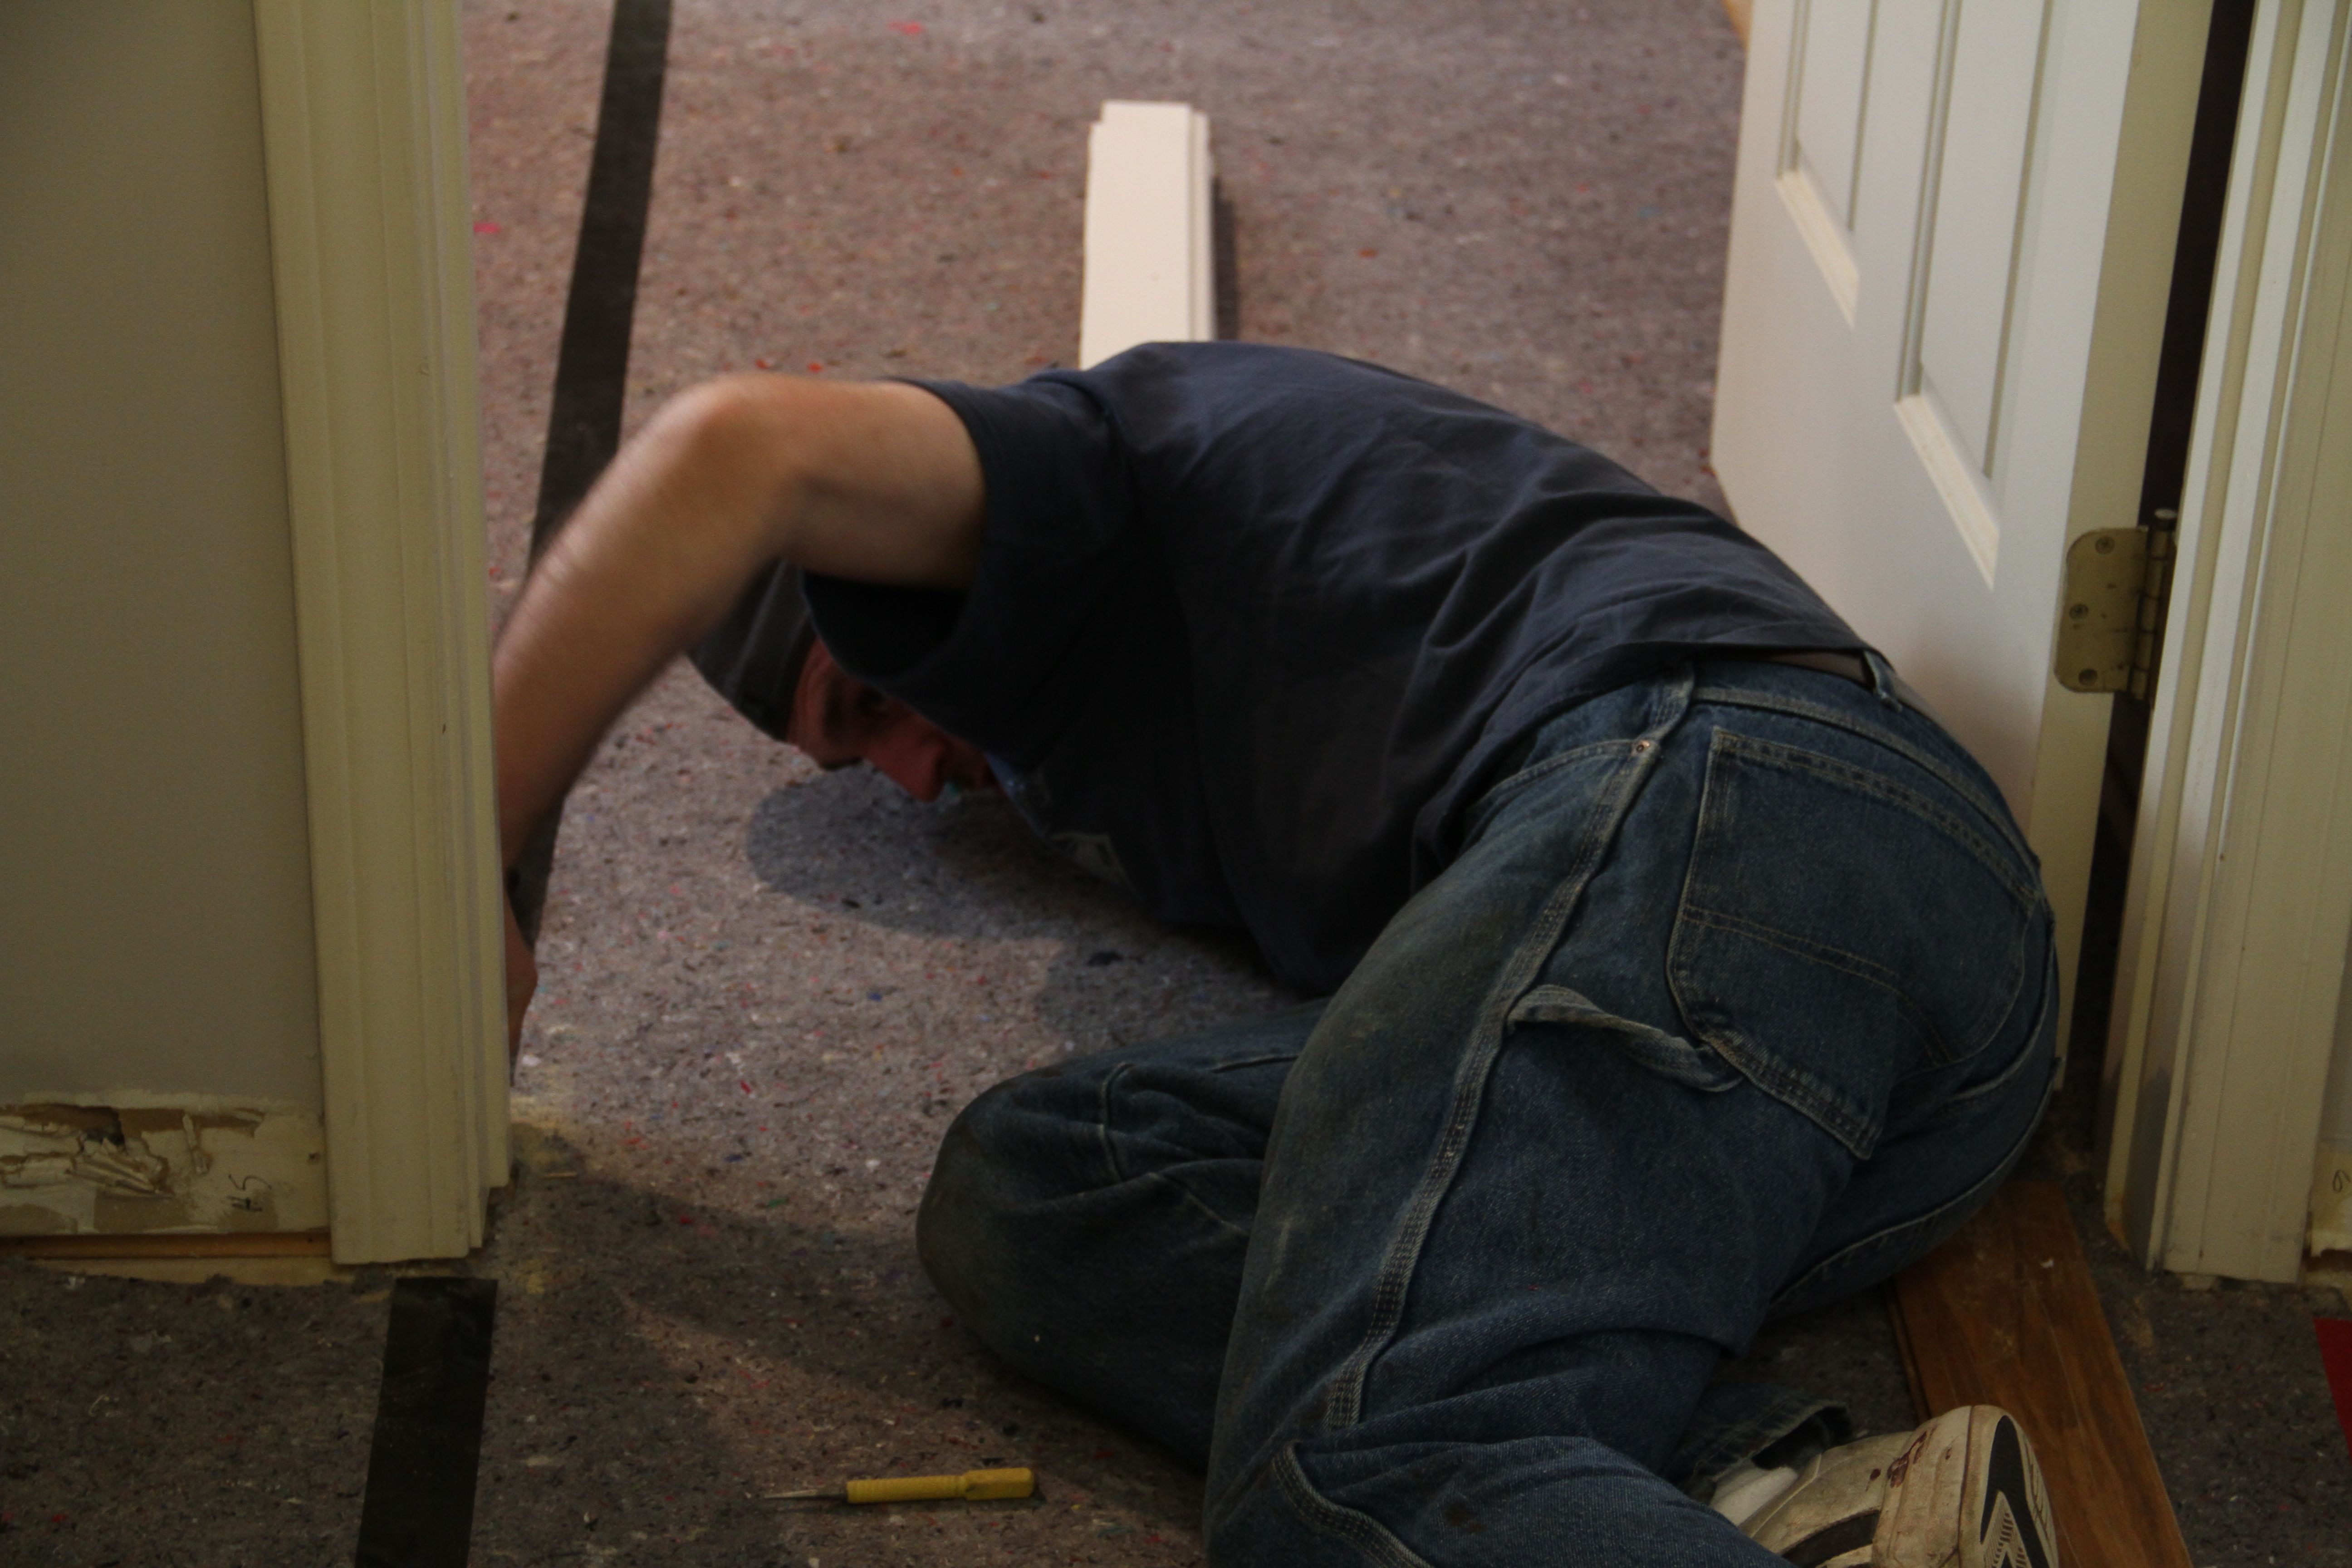 Jonas went ahead of Dave and Brian to remove the part of the door jamb that was previously buried in the carpeting.